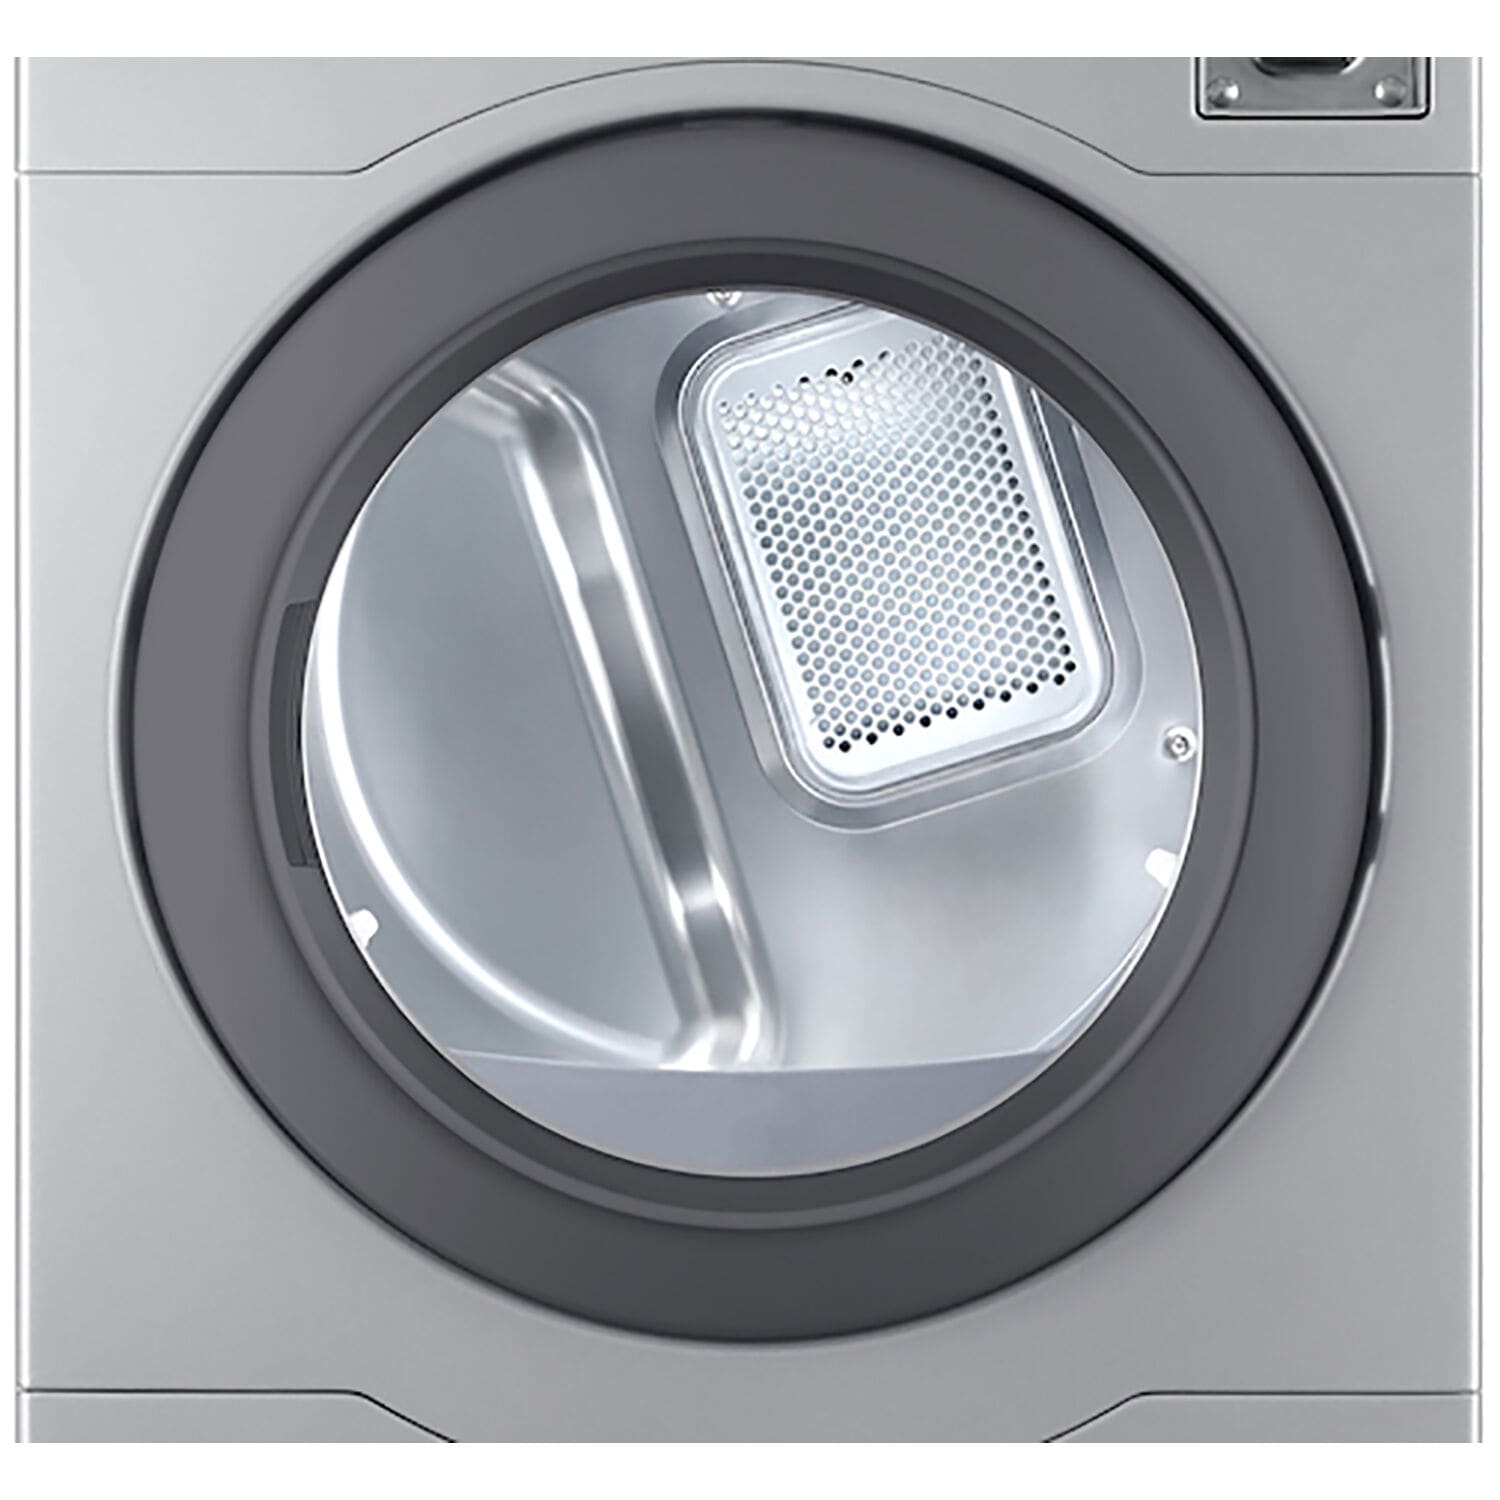 Which washer and dryer type to buy - CREDIT CARD & COIN TIMERS